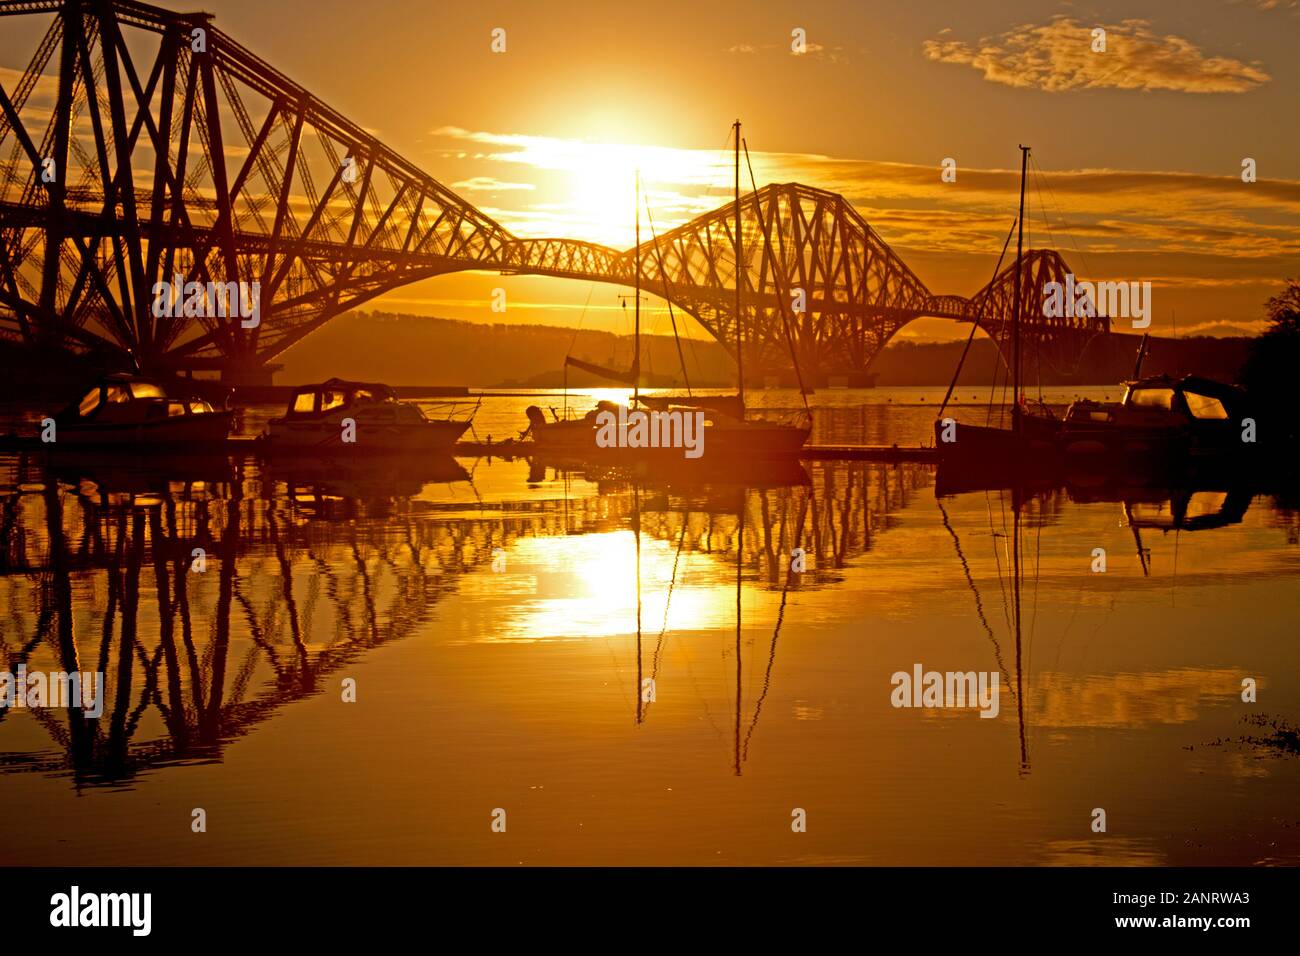 North Queensferry, Scotland, UK. 19th Jan. 2020. Just after sunrise, looking over the Forth Estuary towards Edinburgh to a silhouette of Forth Rail Bridge and small fishing boats Stock Photo